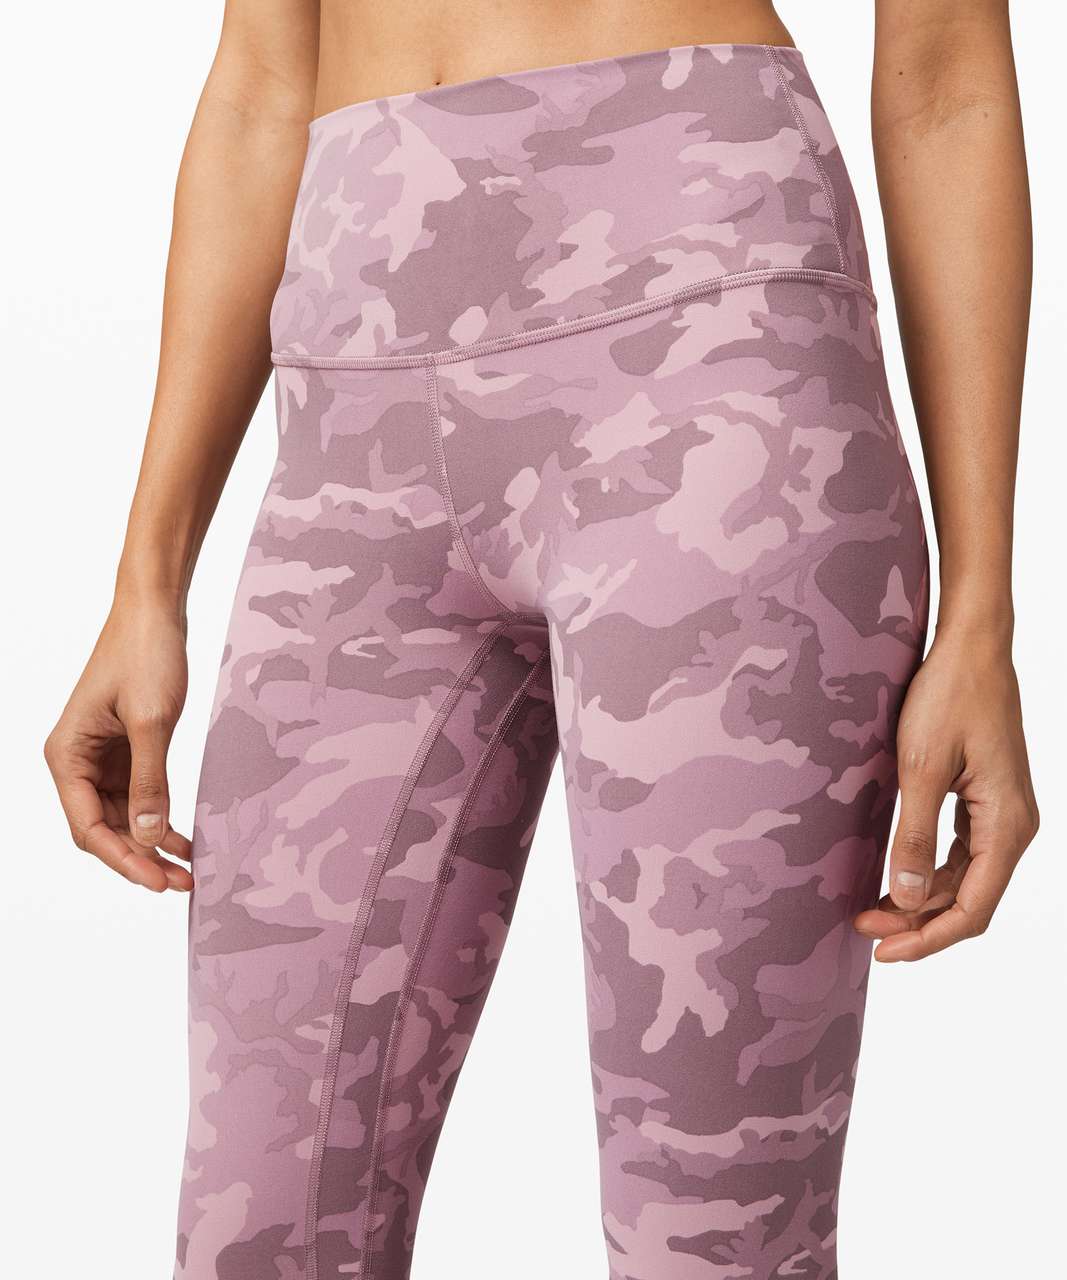 Lululemon Align Pant II 25" - Incognito Camo Pink Taupe Multi